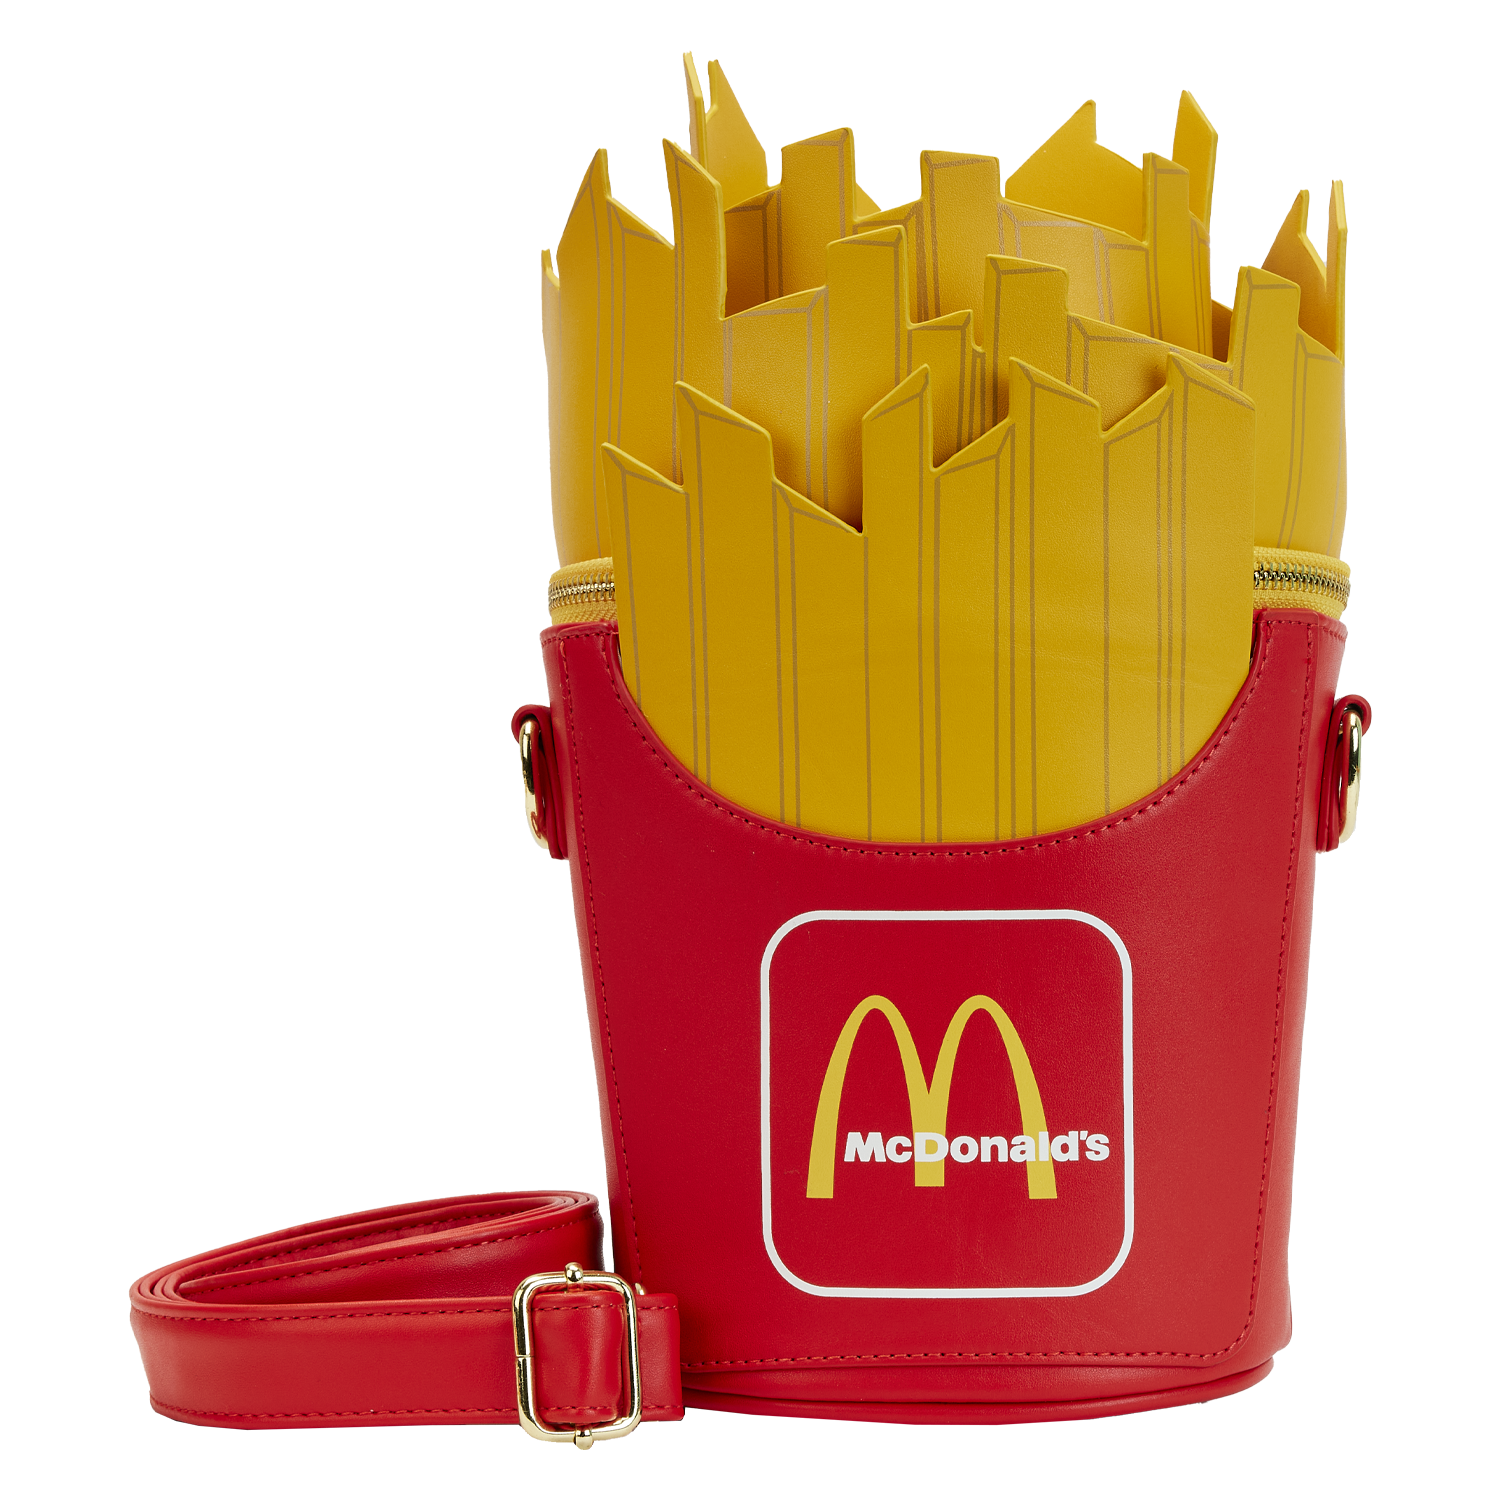 POP figure McDonalds Meal Squad French Fries